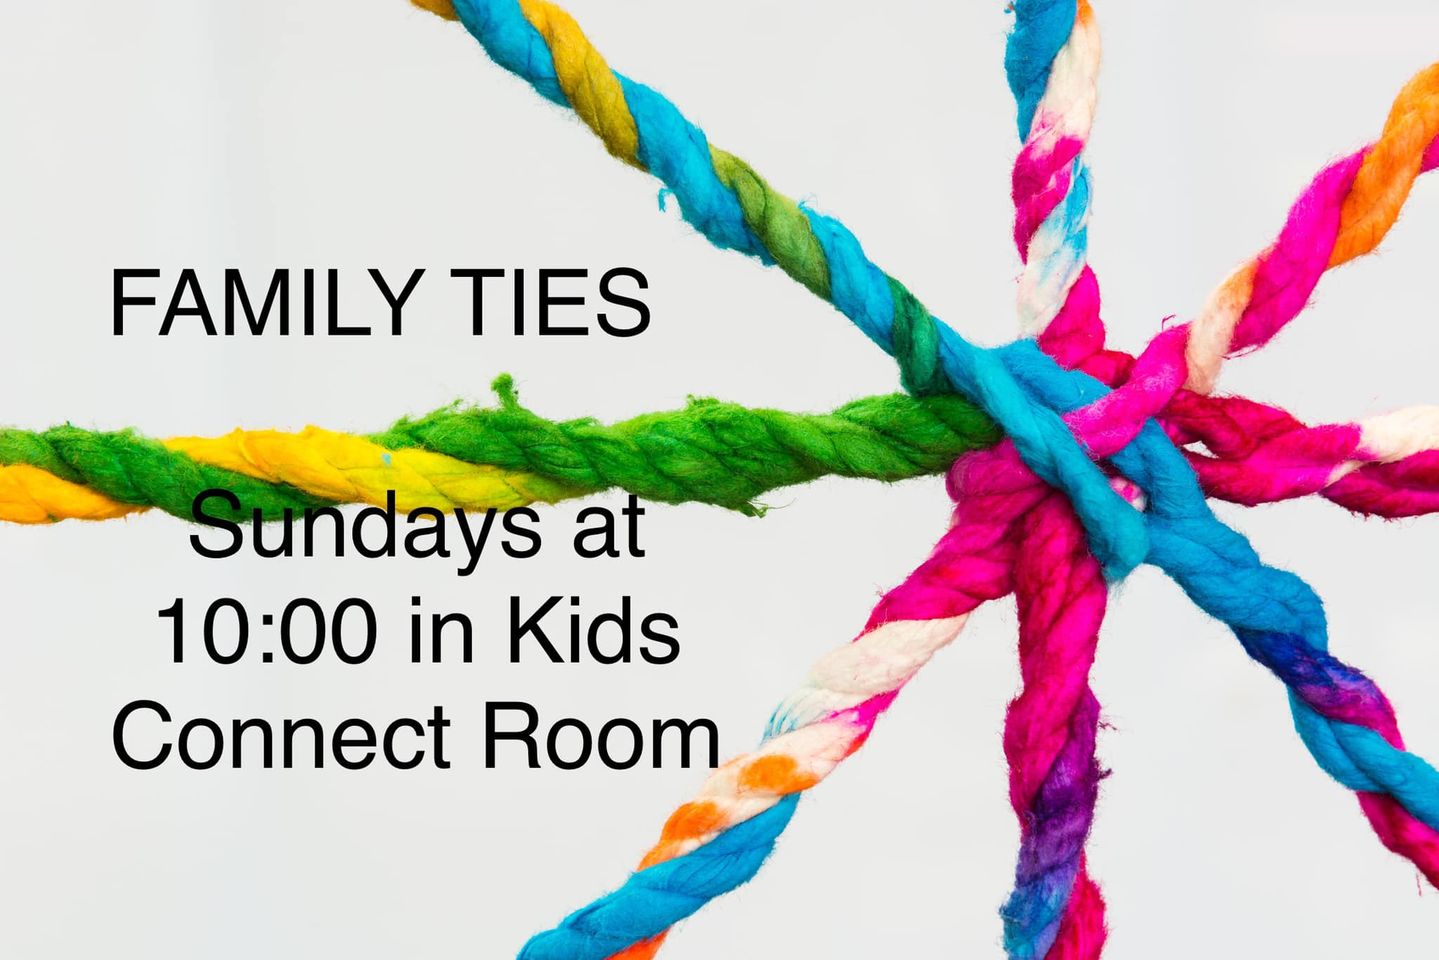 Family Ties: A New Sunday School Class for Kids and Their Families